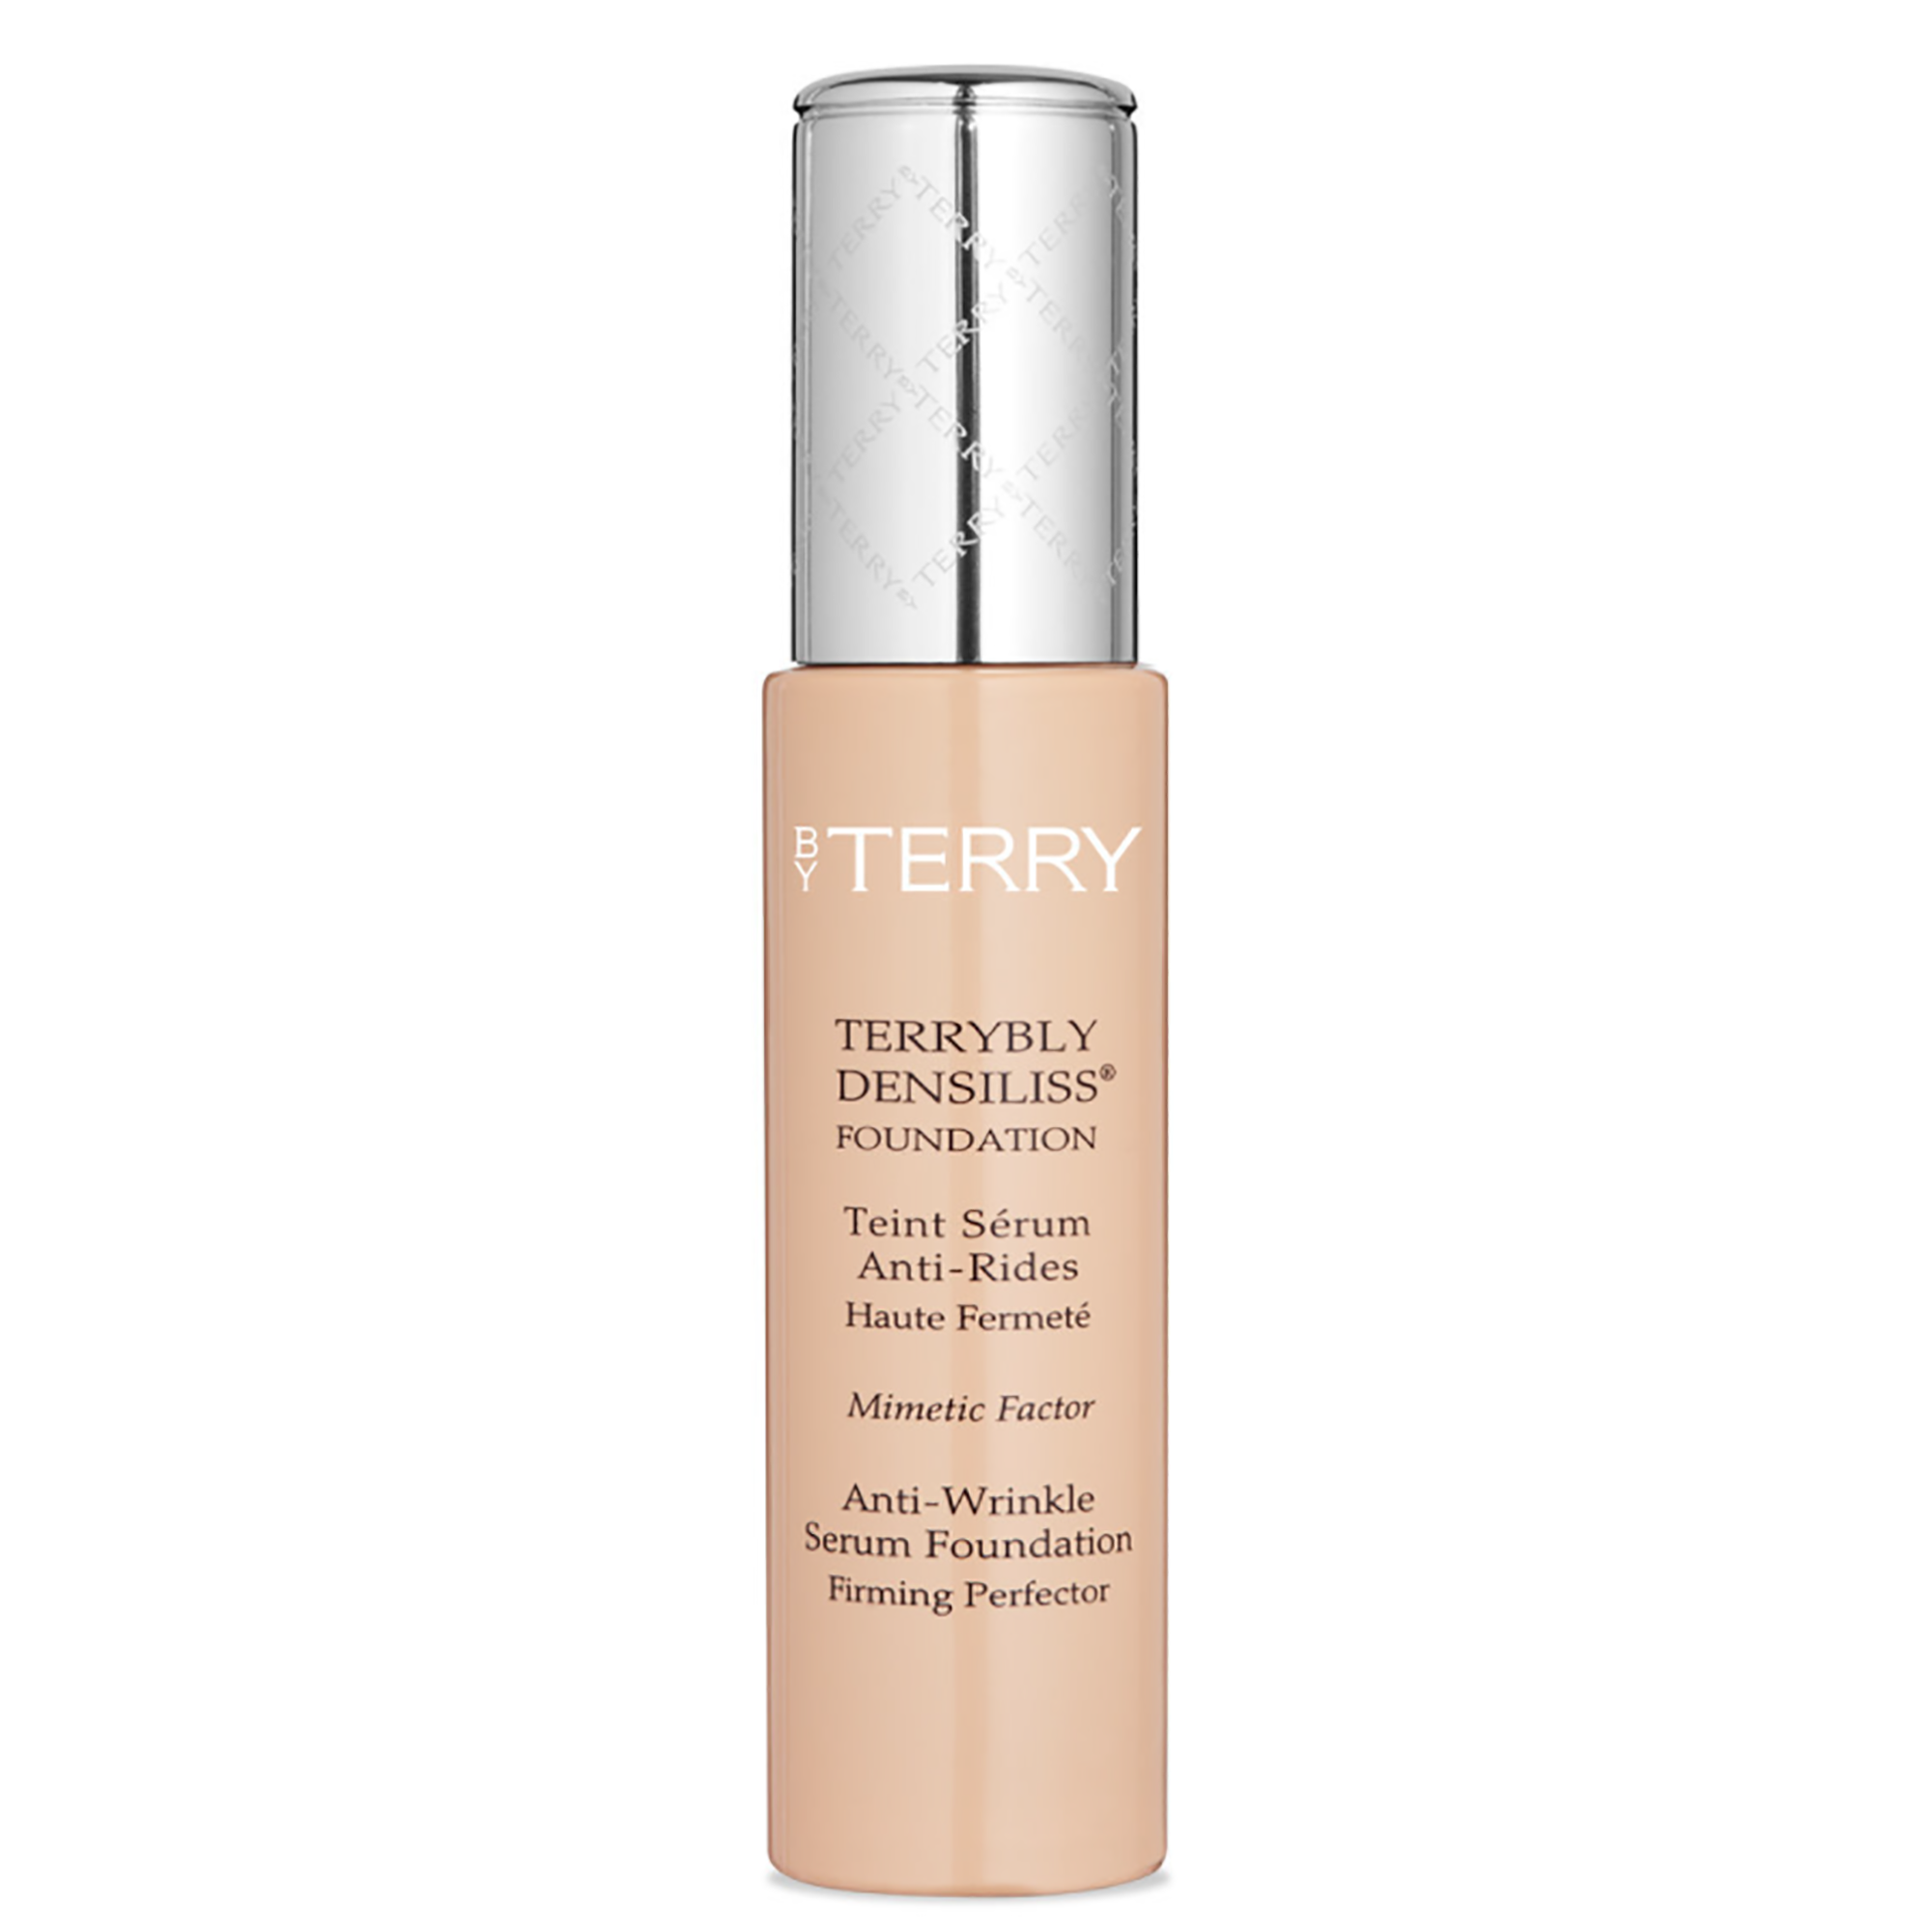 By Terry Terrybly Densiliss Anti-Wrinkle Serum Foundation #6 Light Amber